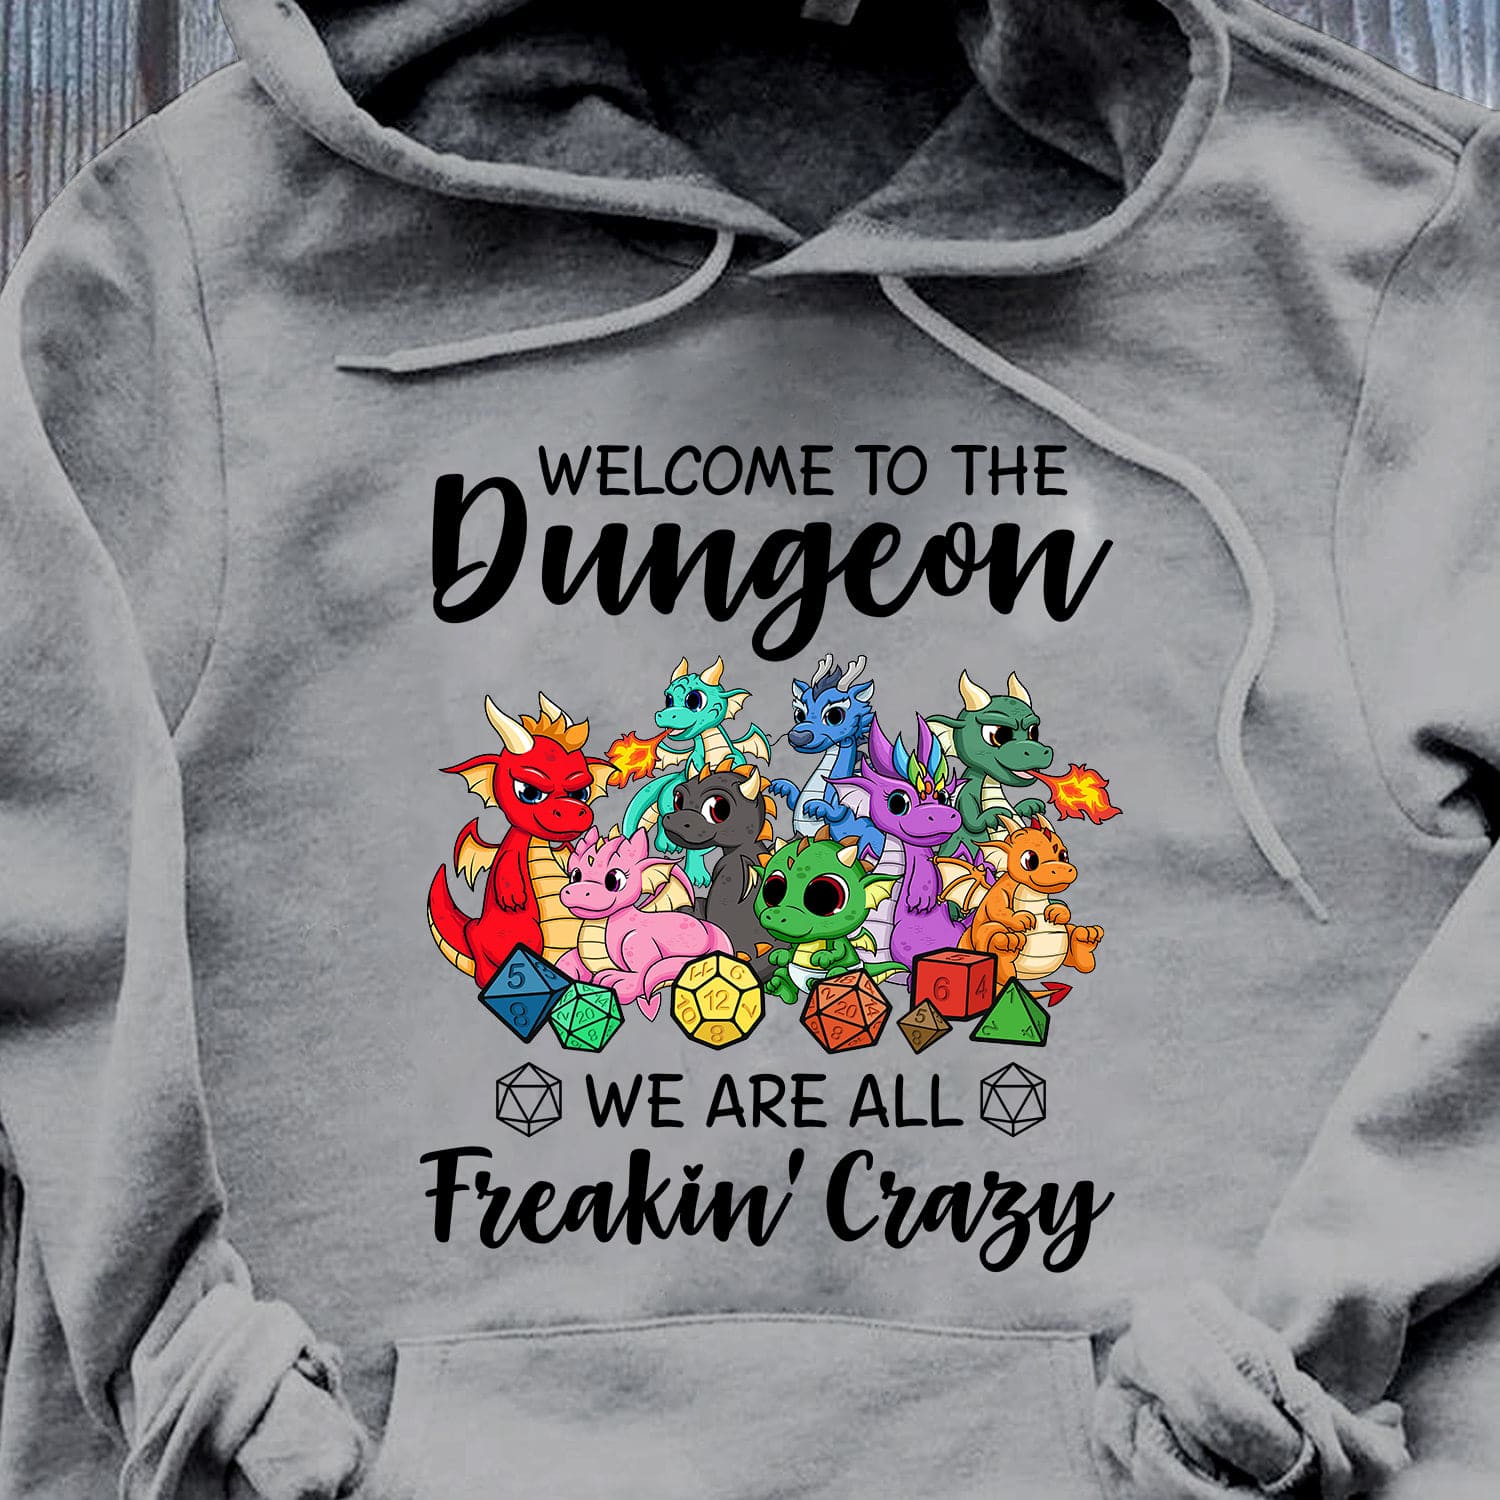 Welcome to the Dungeon, we are all freakin crazy - Dragon and dice, Dungeons and Dragons